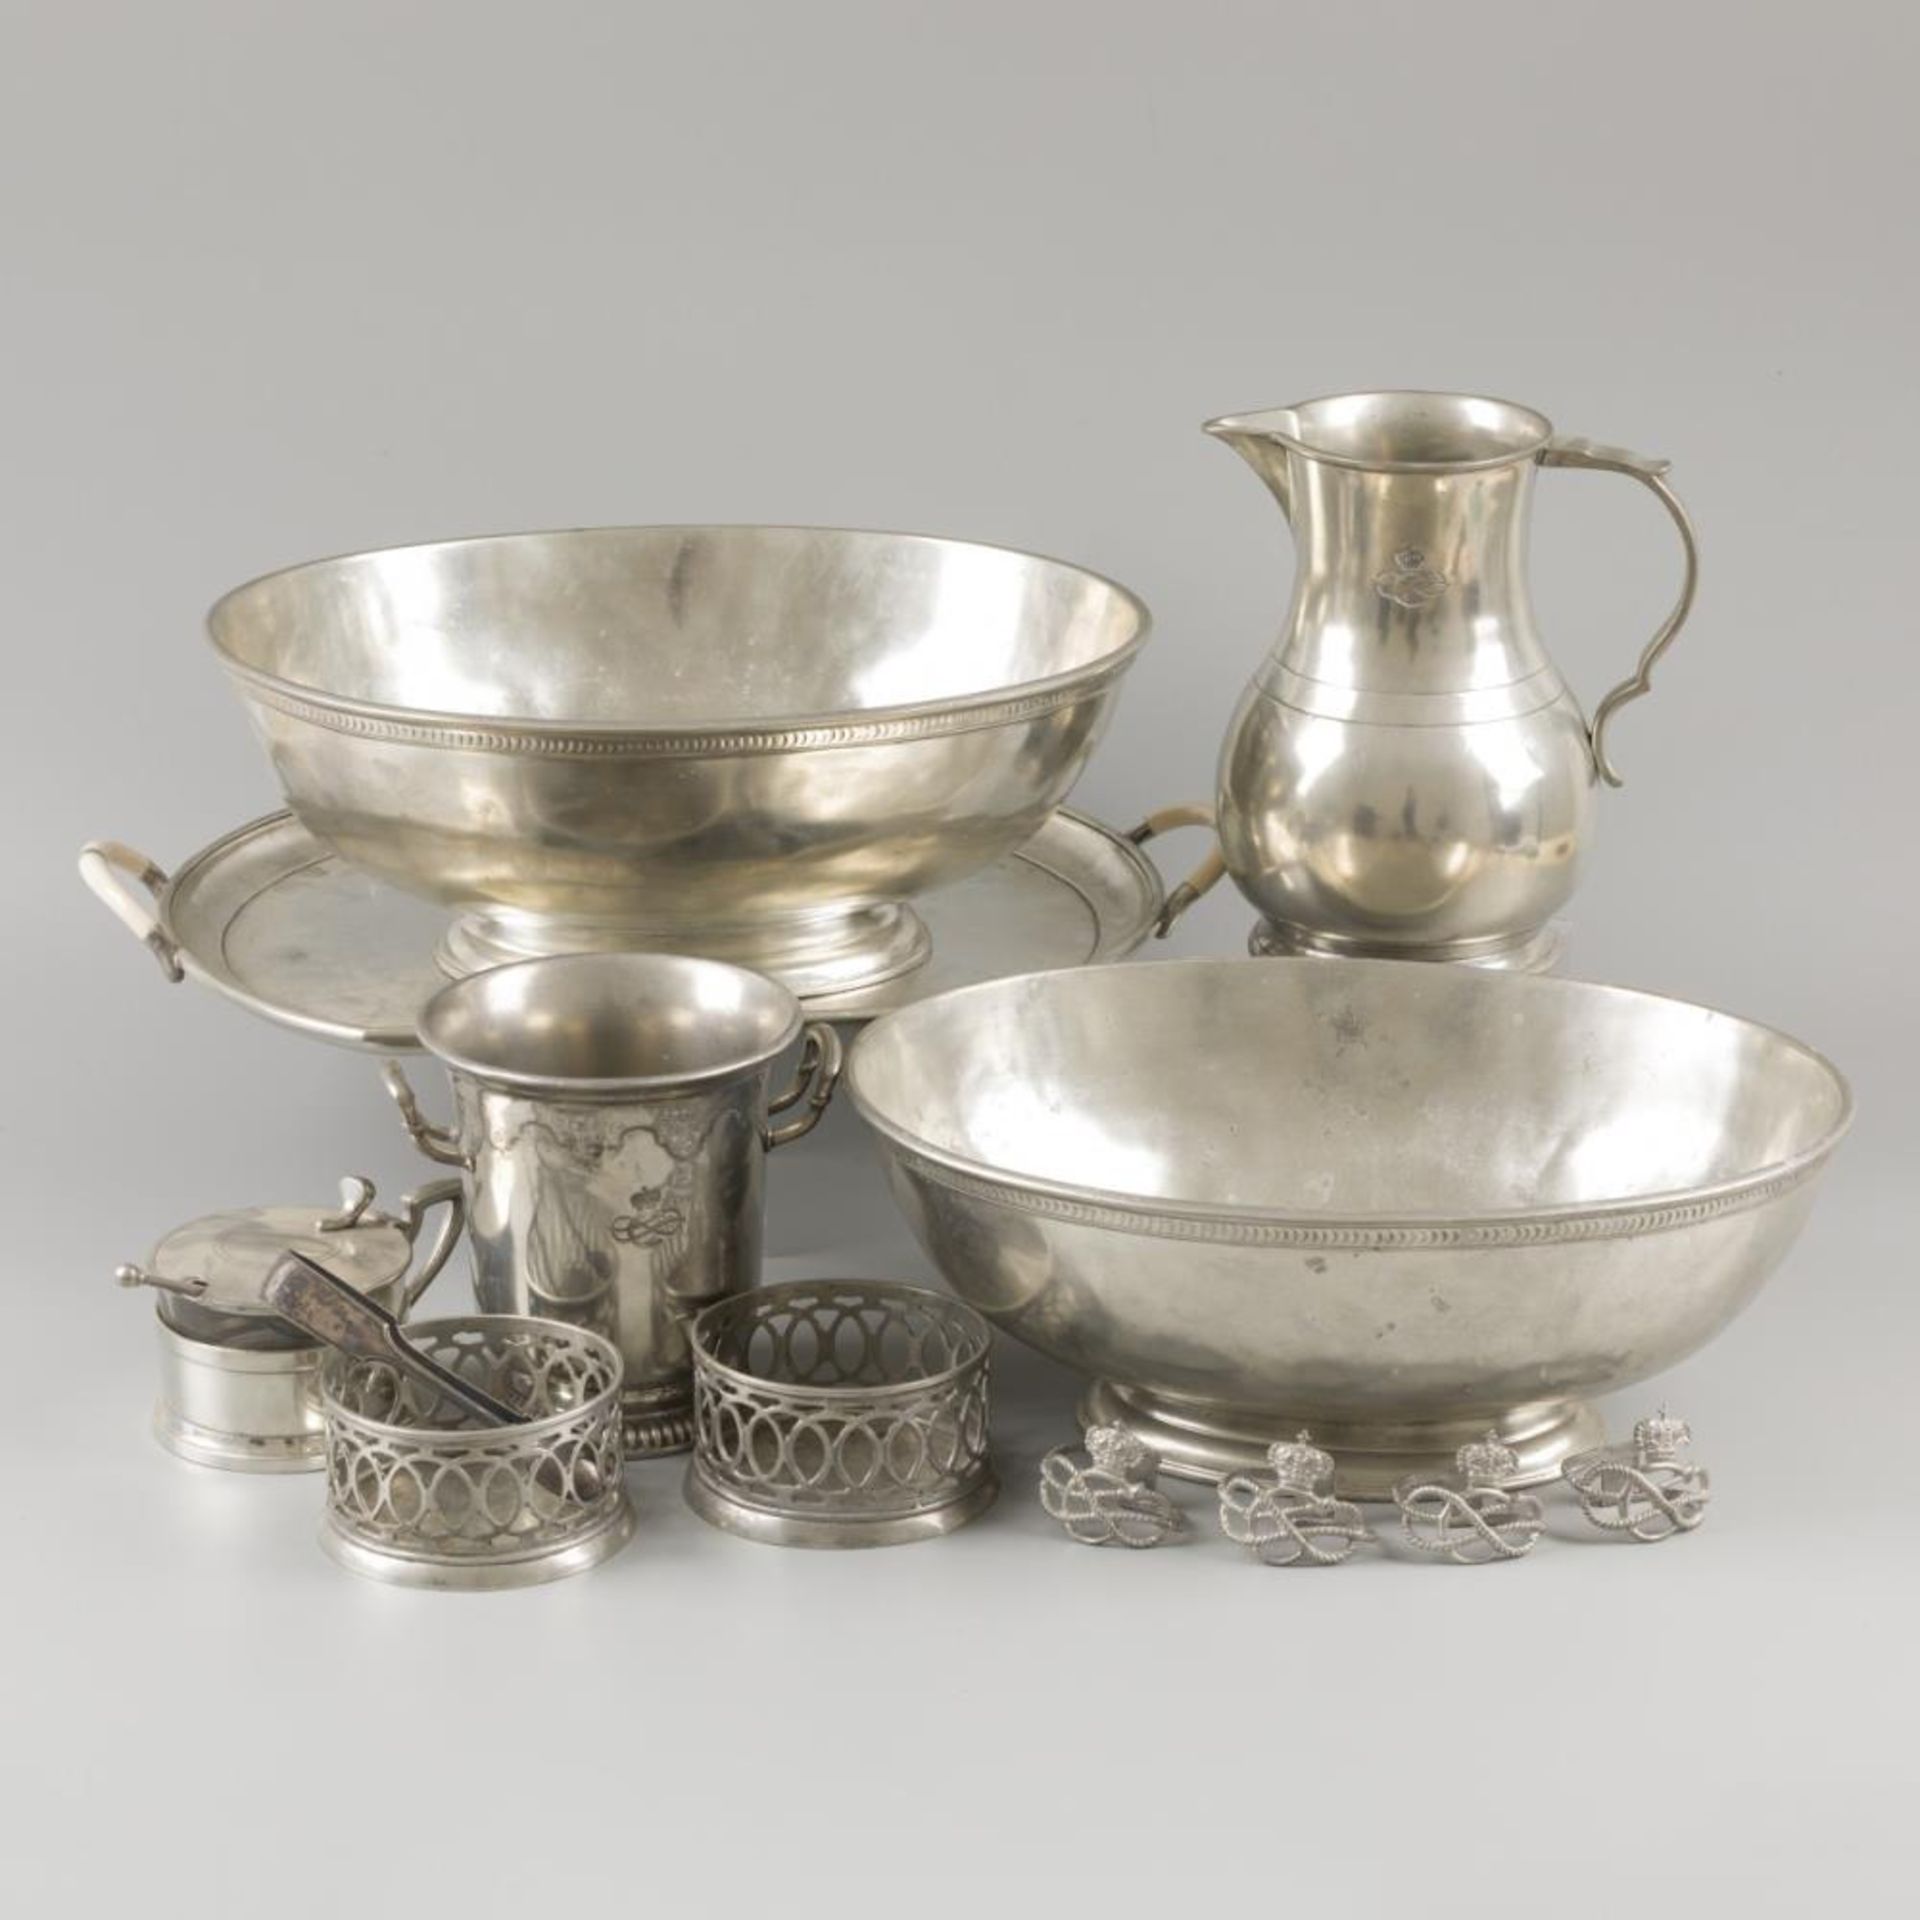 A collection of plate items, originating from a ship, 20th century.